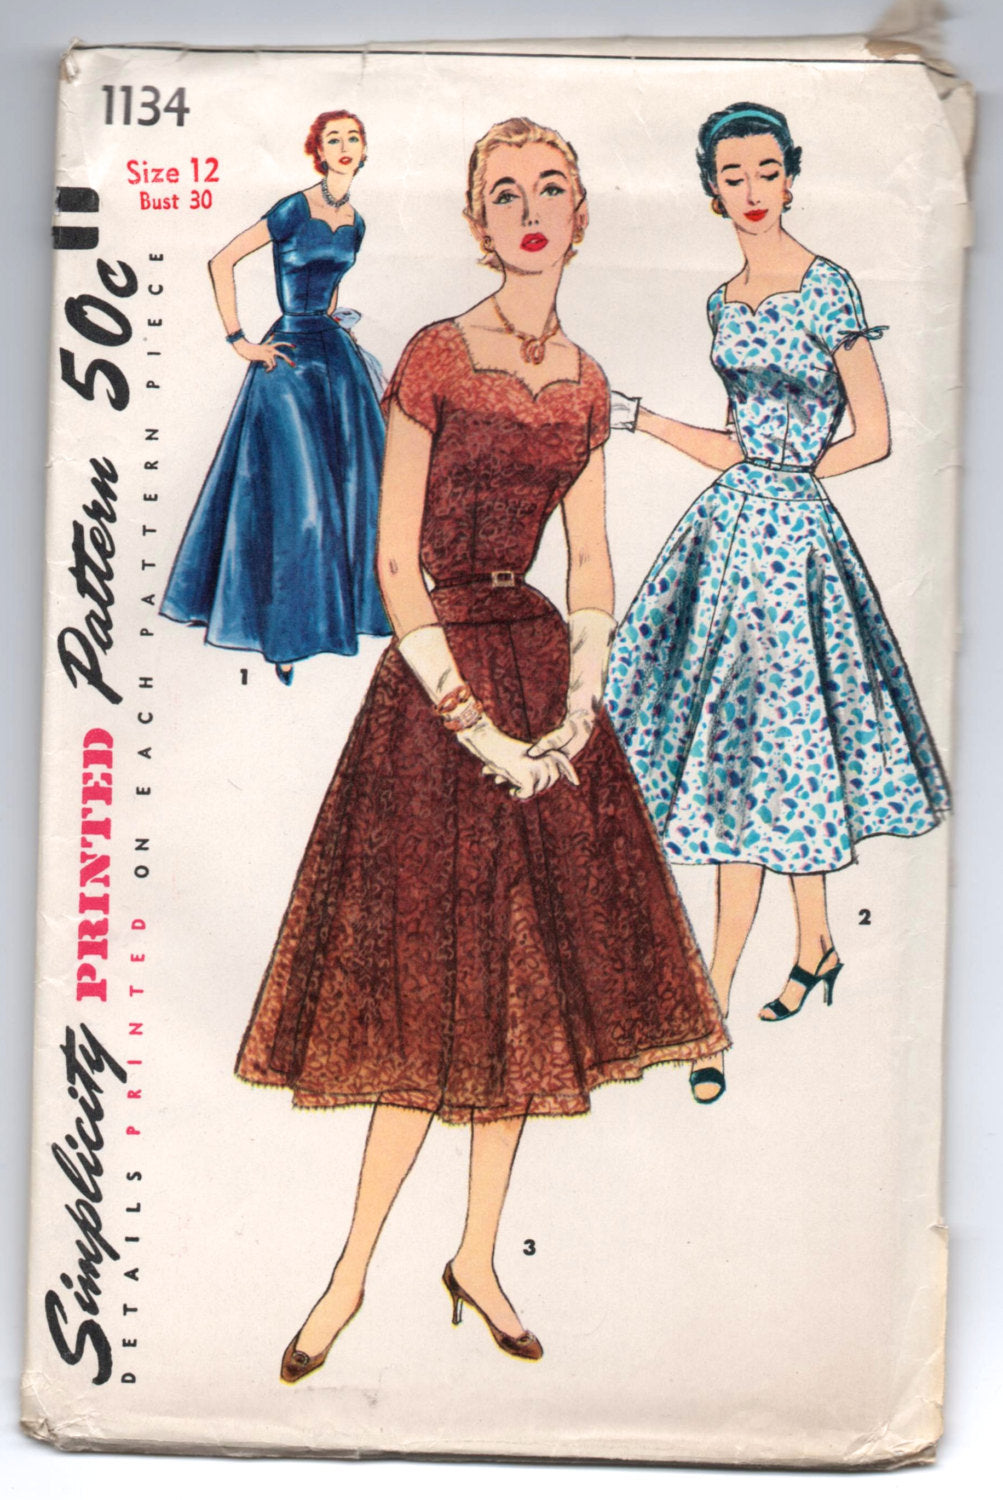 1950's Simplicity One-Piece Cocktail or Evening Dress with Flared Skirt Pattern - UC/FF - Bust 30